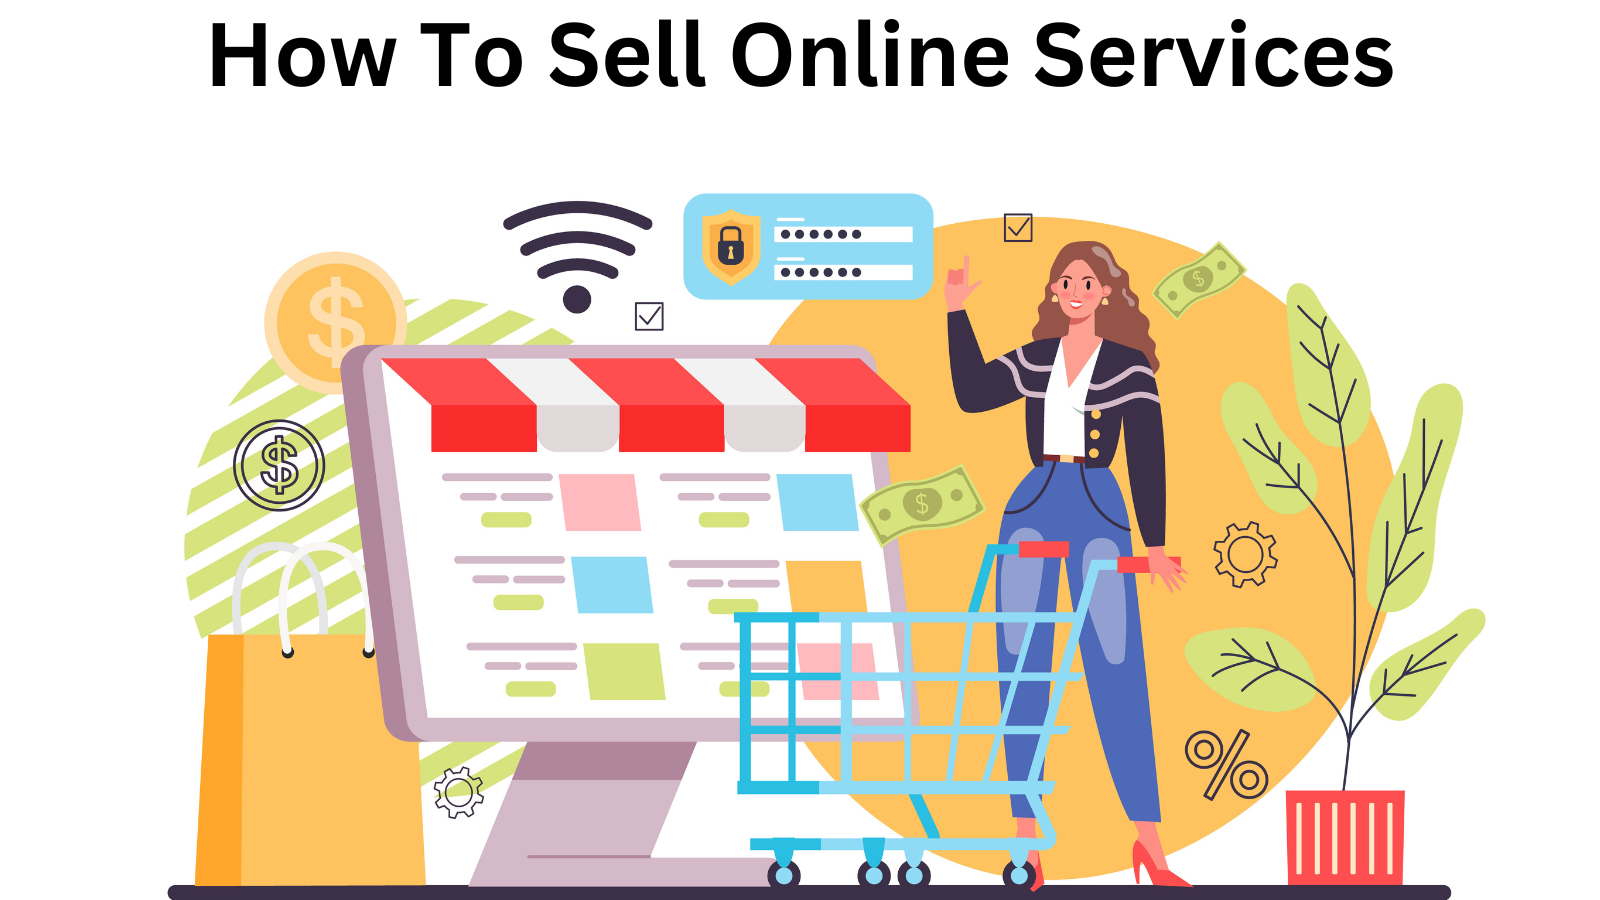 How to sell online services